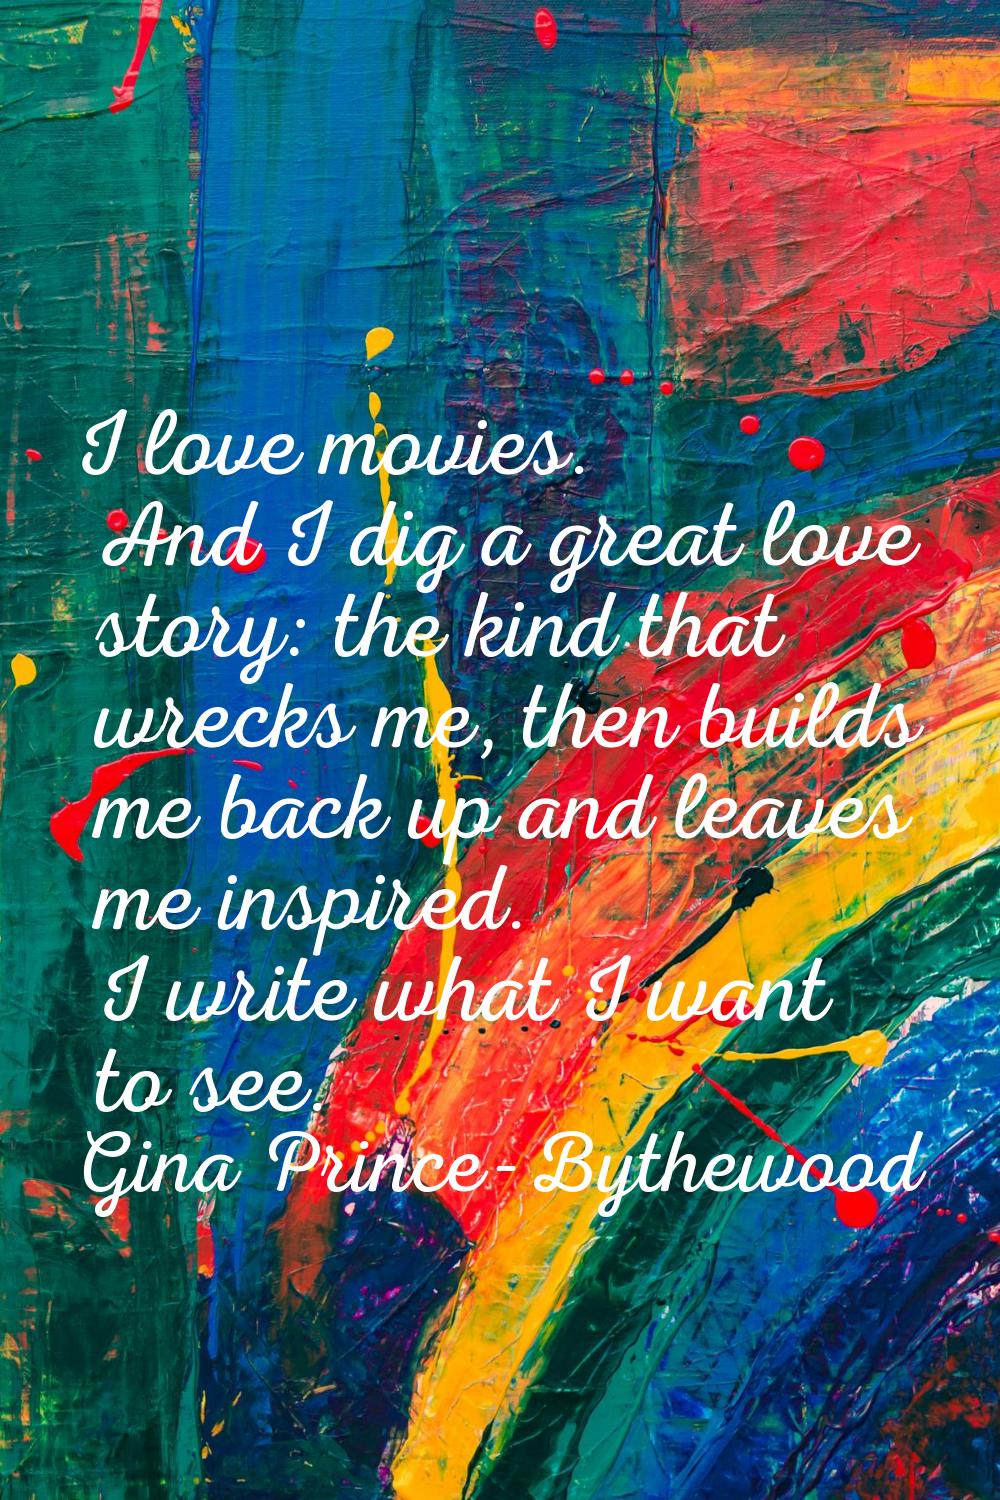 I love movies. And I dig a great love story: the kind that wrecks me, then builds me back up and le